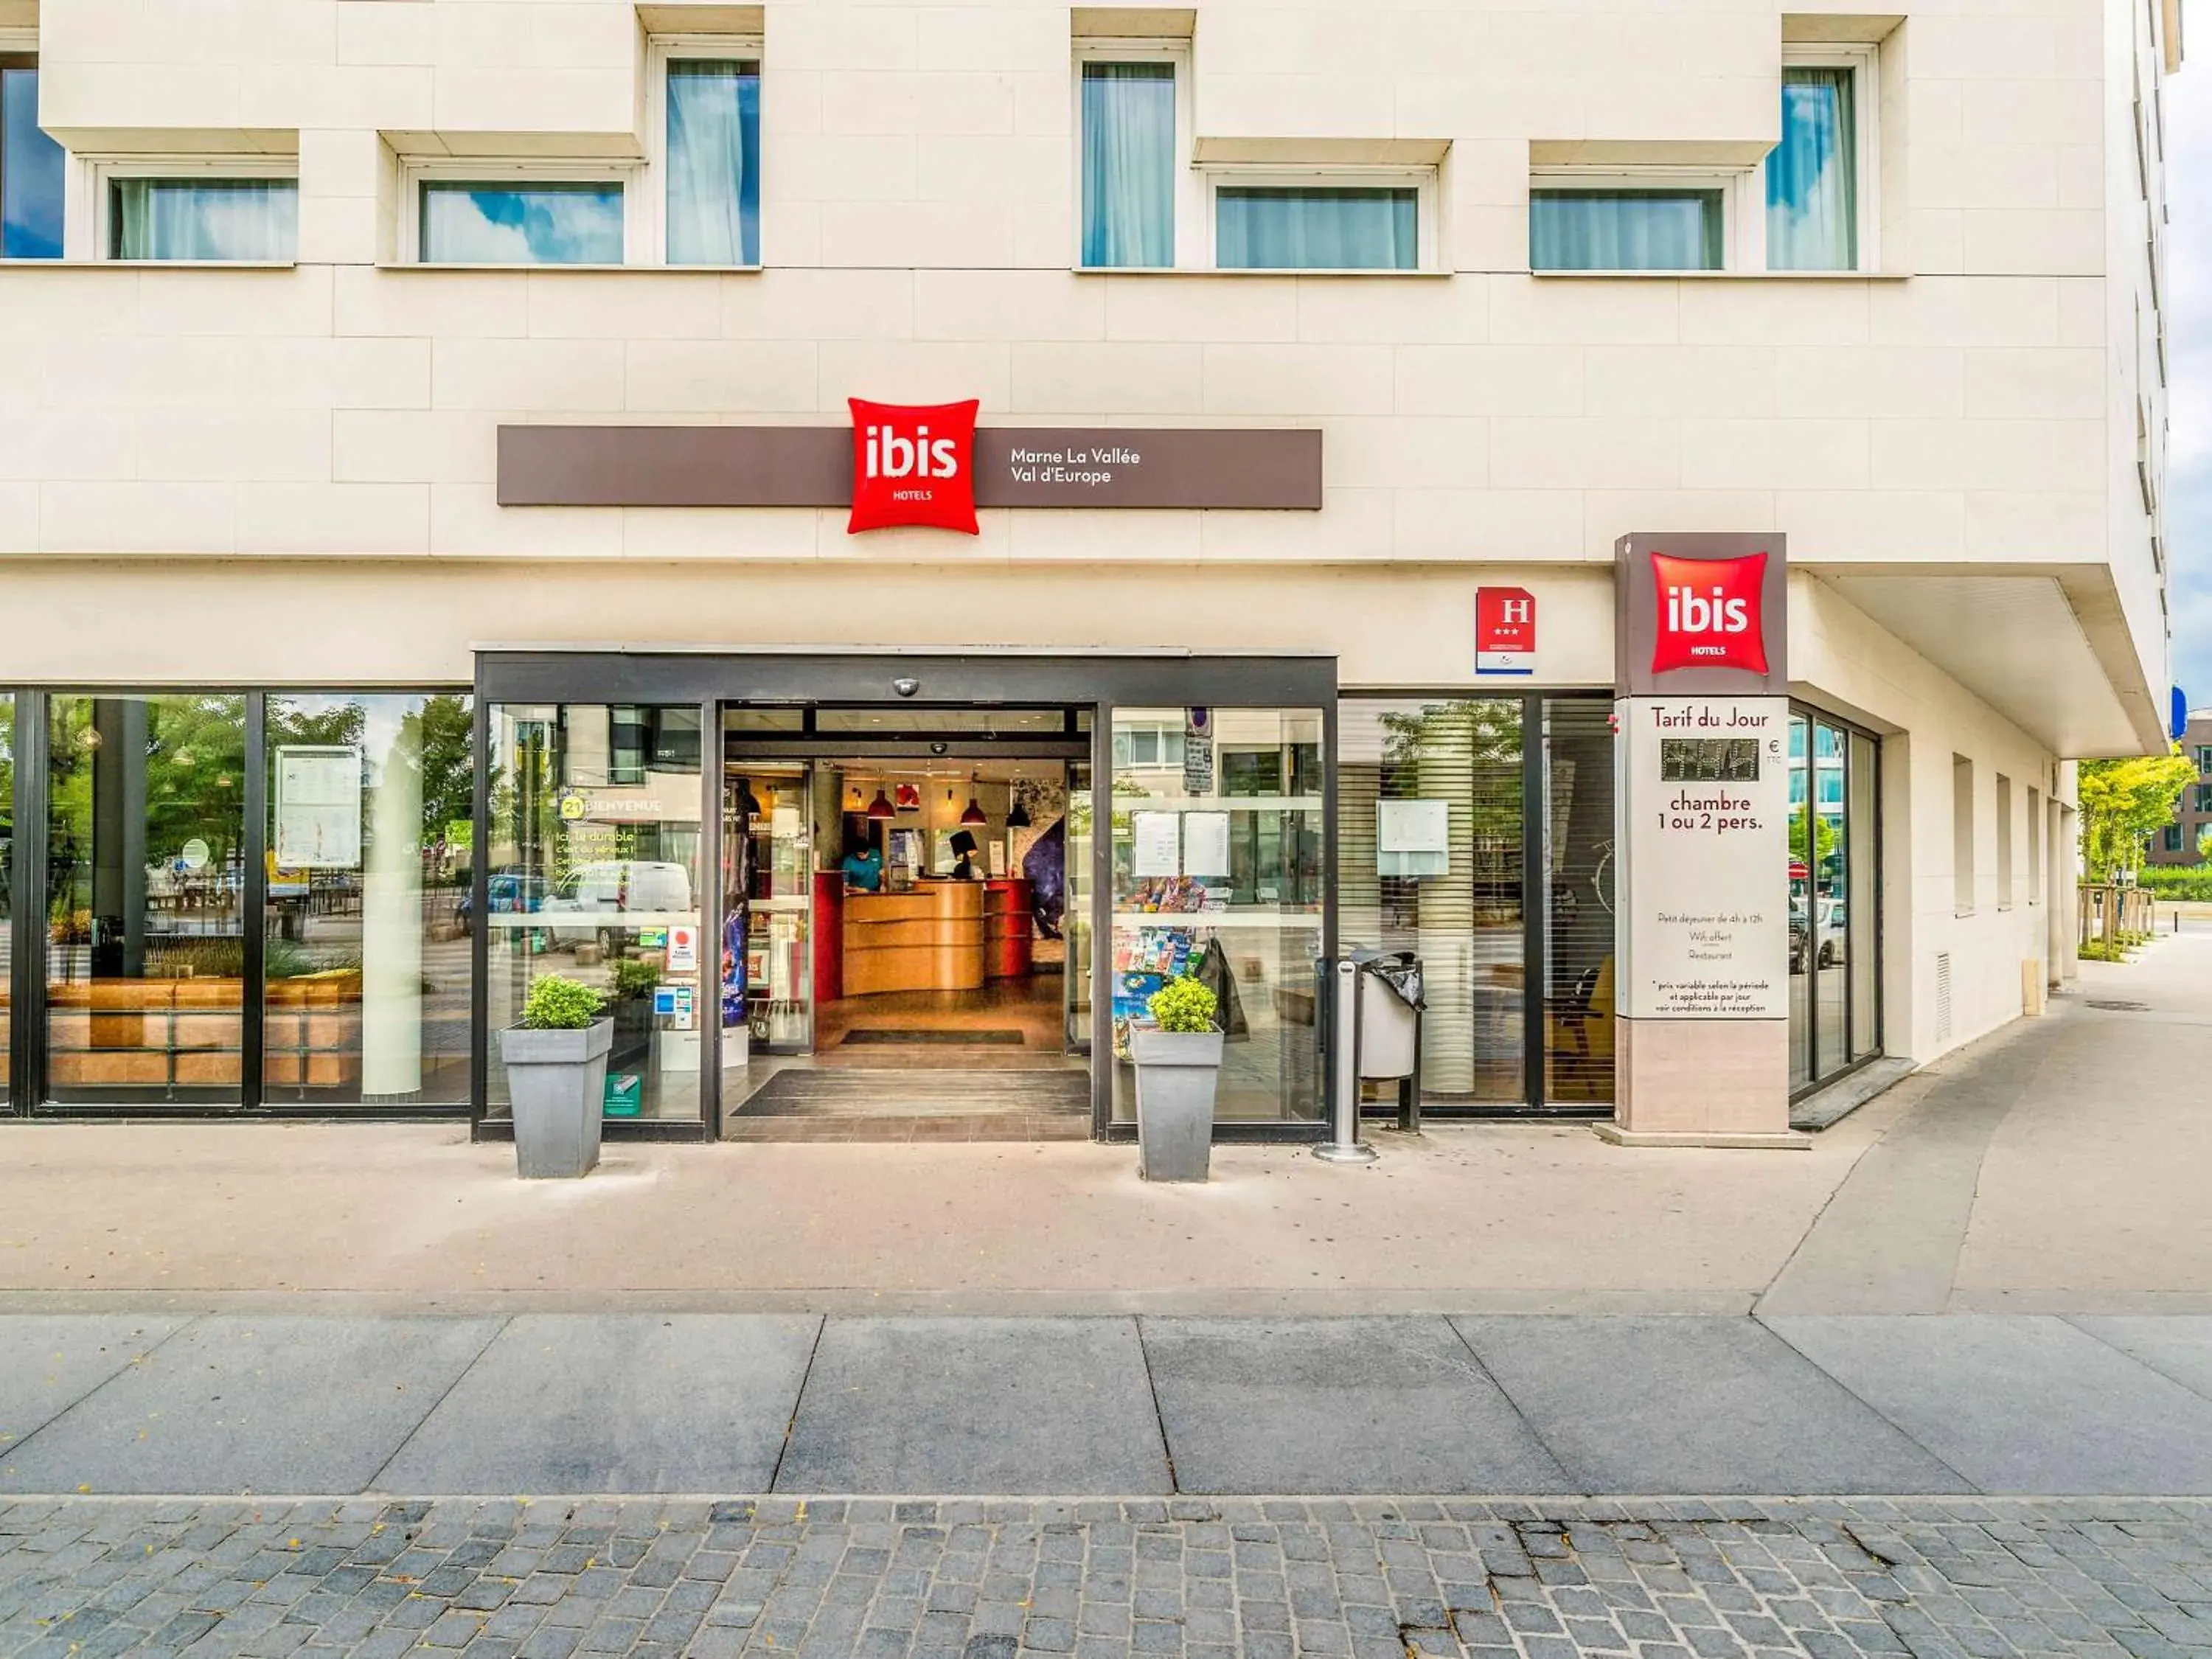 Property building in ibis Marne La Vallée Val d'Europe